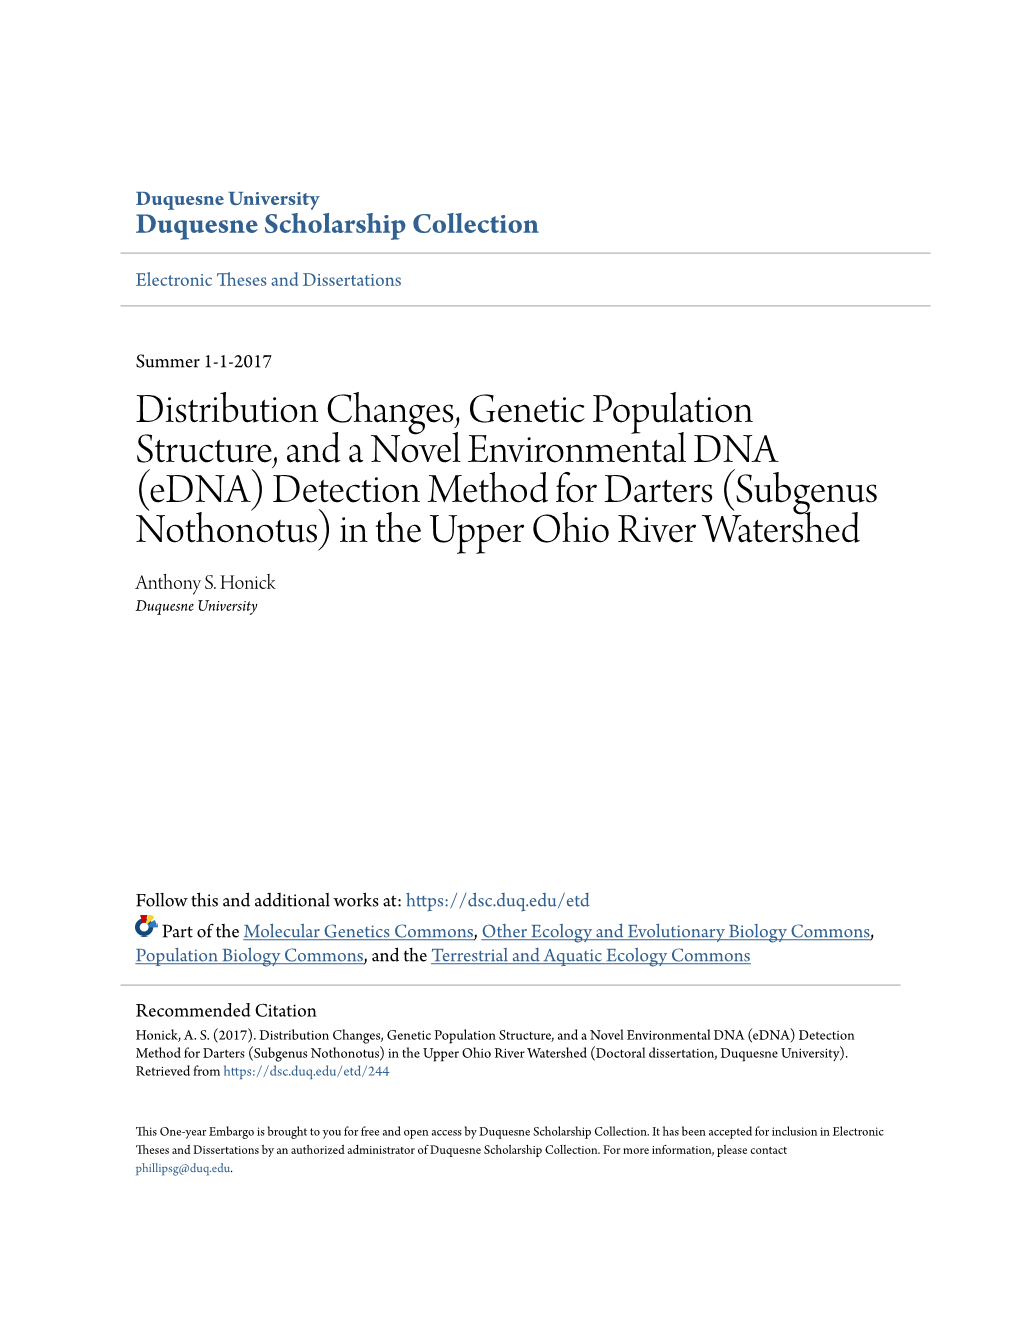 Distribution Changes, Genetic Population Structure, and a Novel Environmental DNA (Edna) Detection Method for Darters (Subgenus